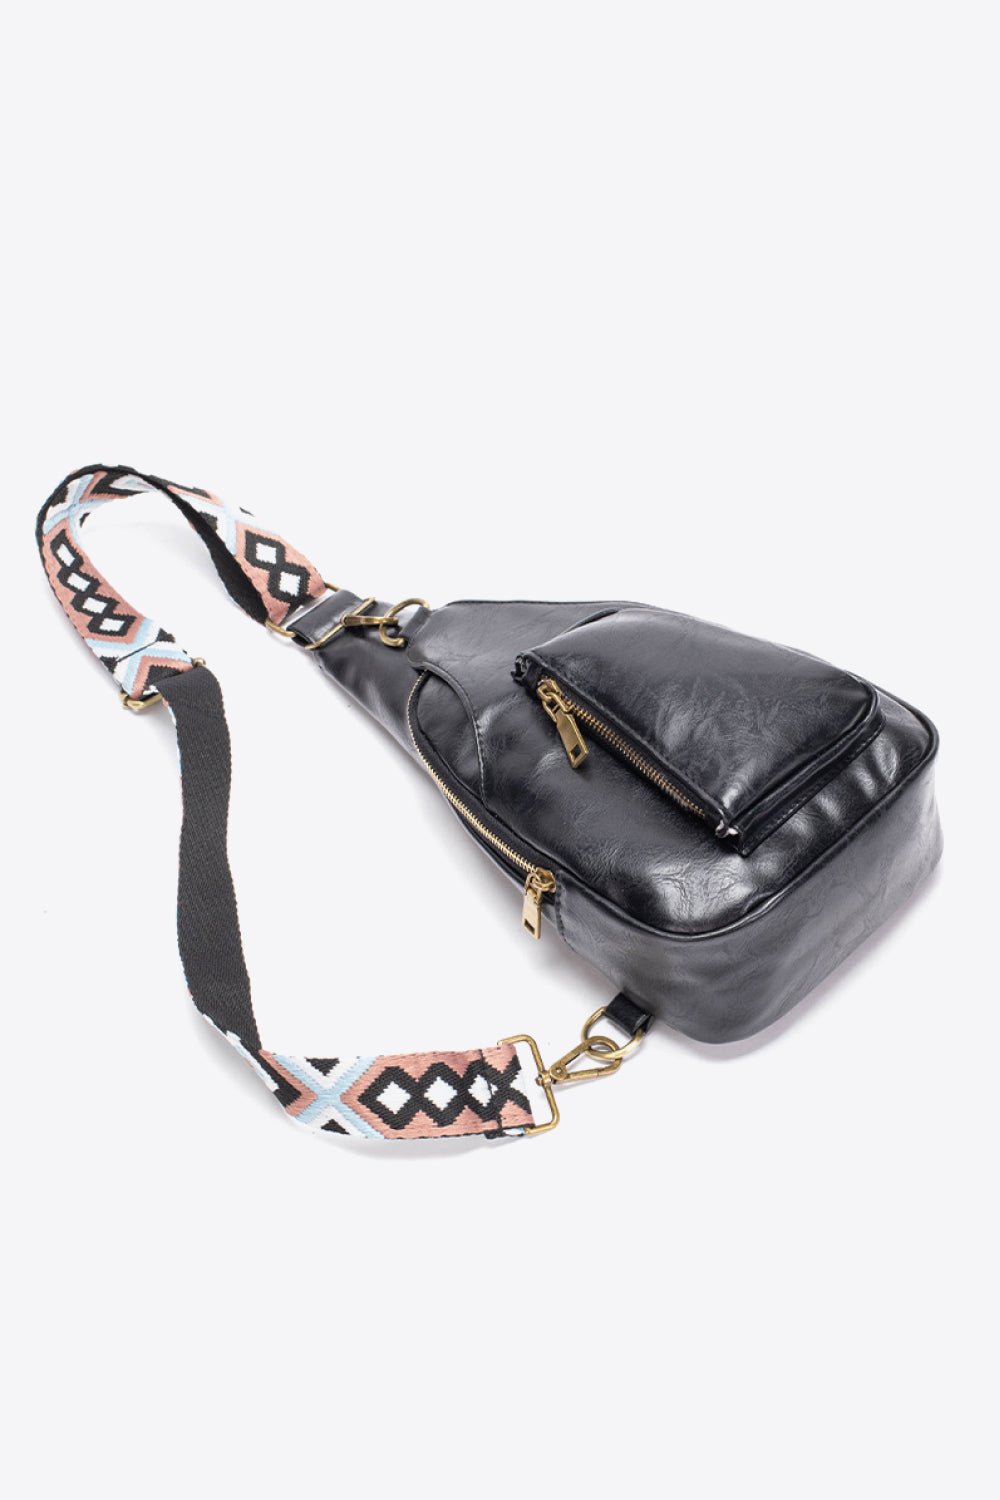 All The Feels PU Leather Sling Bag - Unleash Your Passion with Every Step - Carry Love and Romance Everywhere You Go - Guy Christopher 